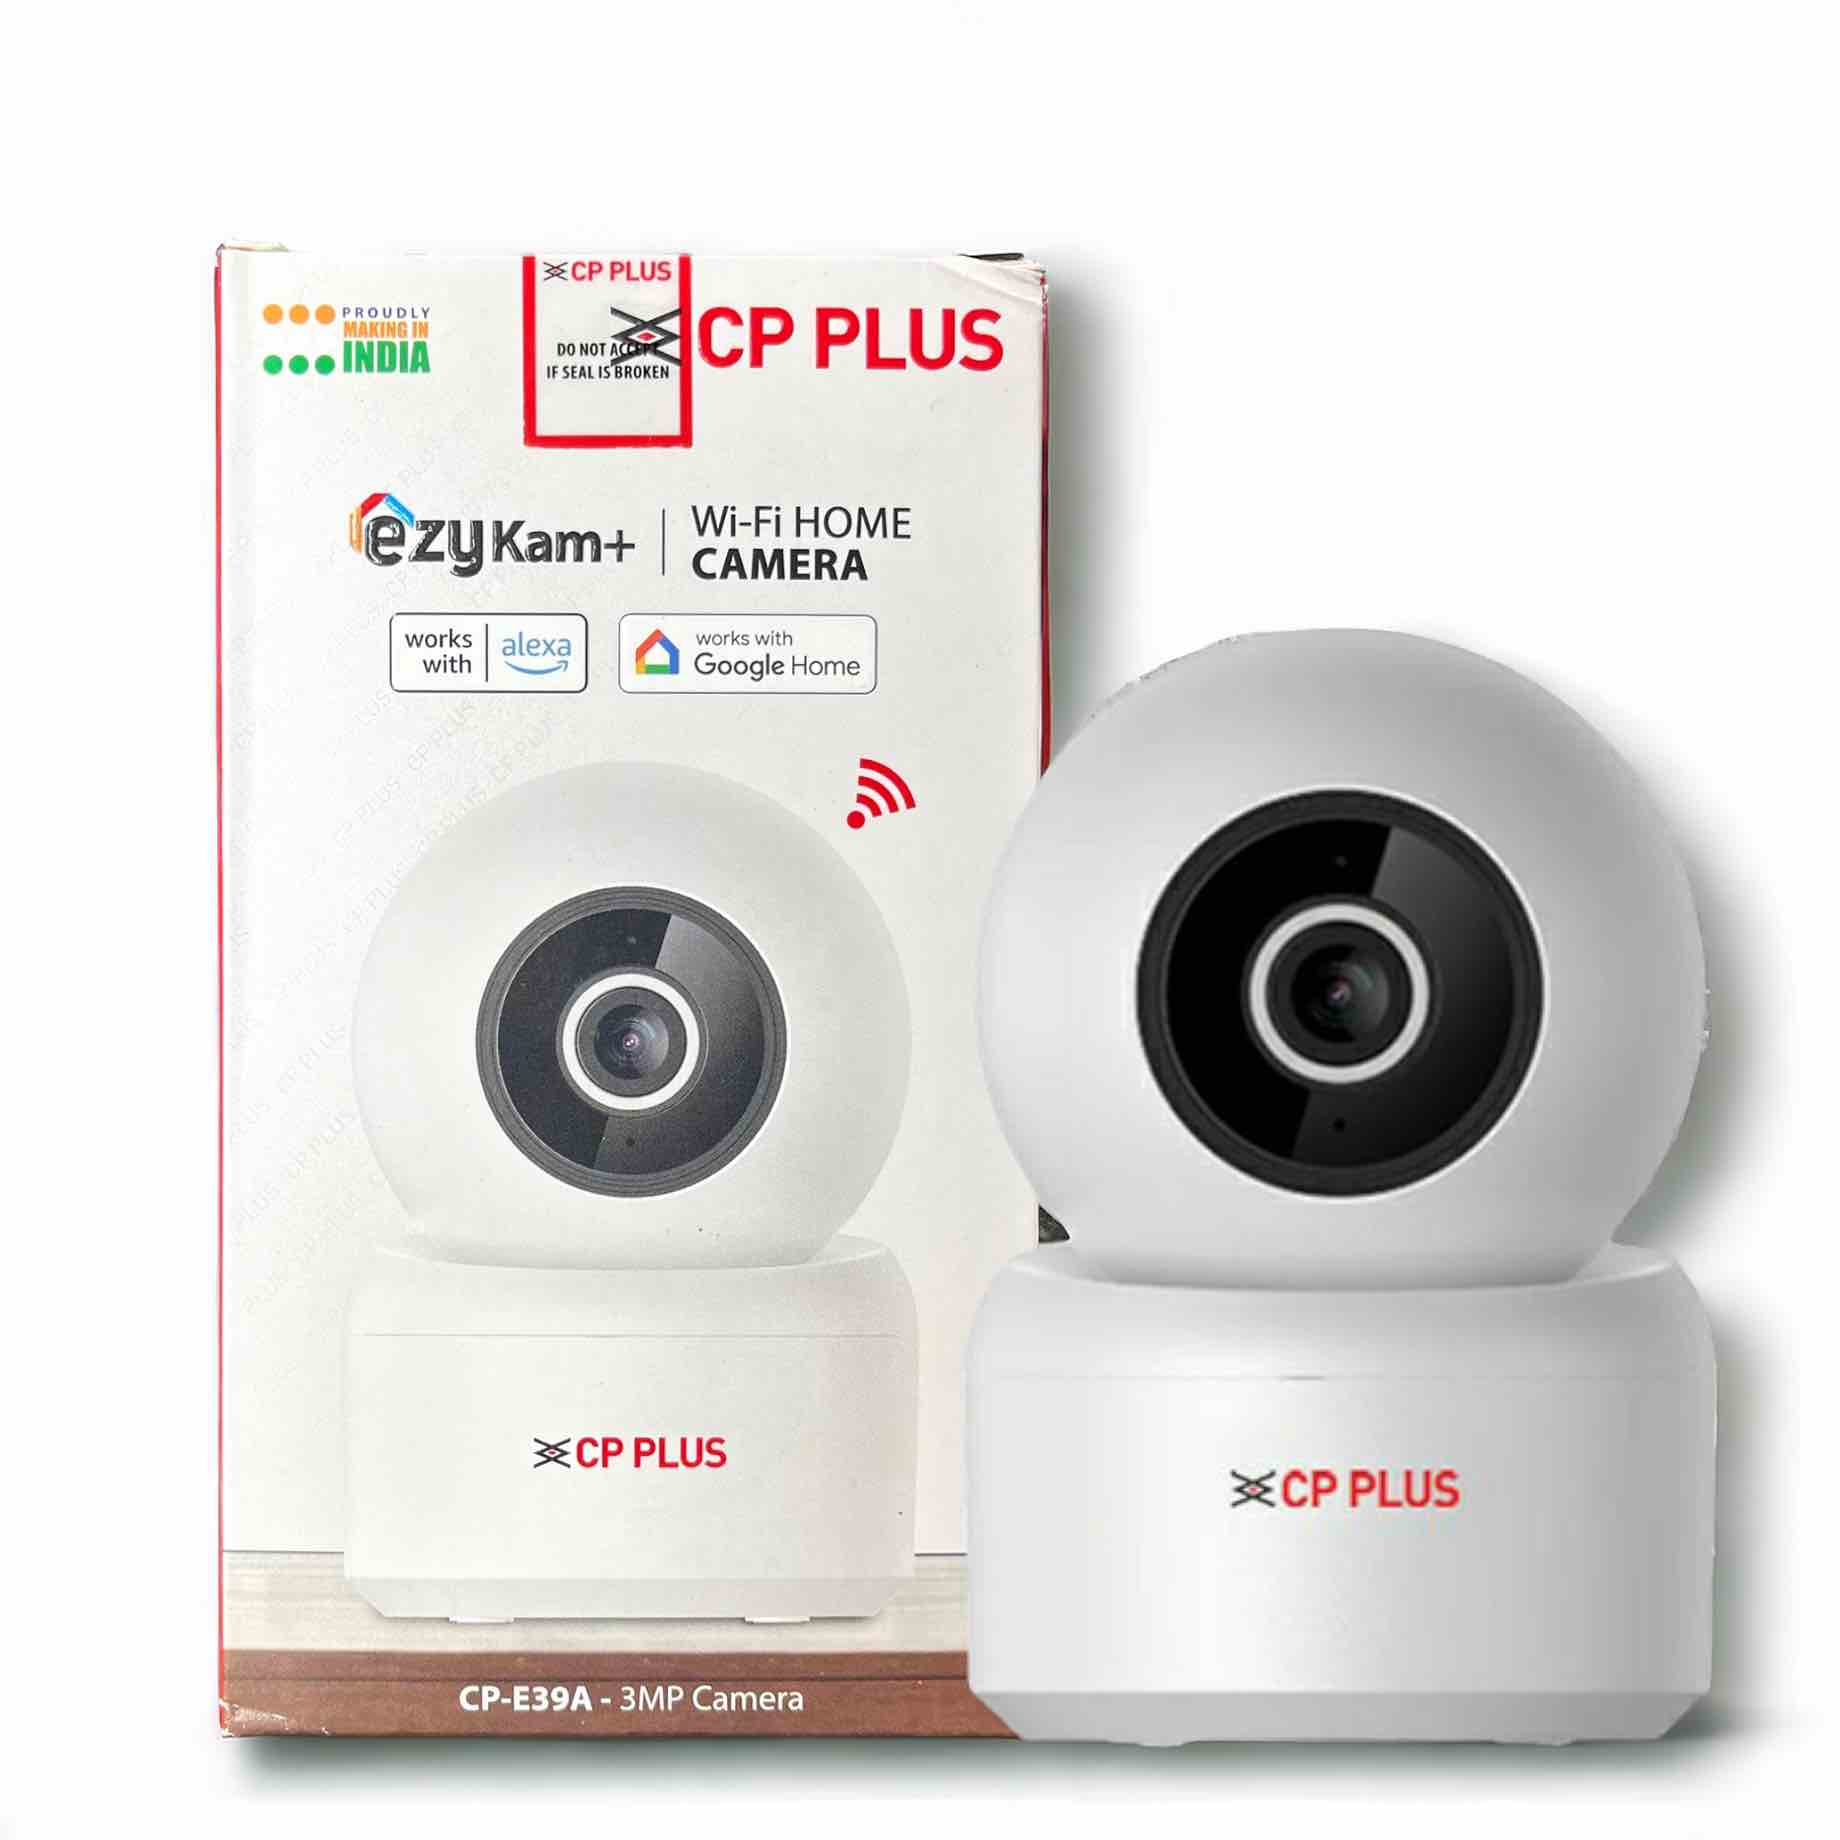 CP PLUS 3MP Full HD Smart Wi-Fi CCTV Home Security Camera | 360° View | 2 Way Talk | Cloud Monitor | Motion Detect | Night Vision | Supports SD Card, Alexa & Ok Google | 15 Mtr, White- CP-E39A